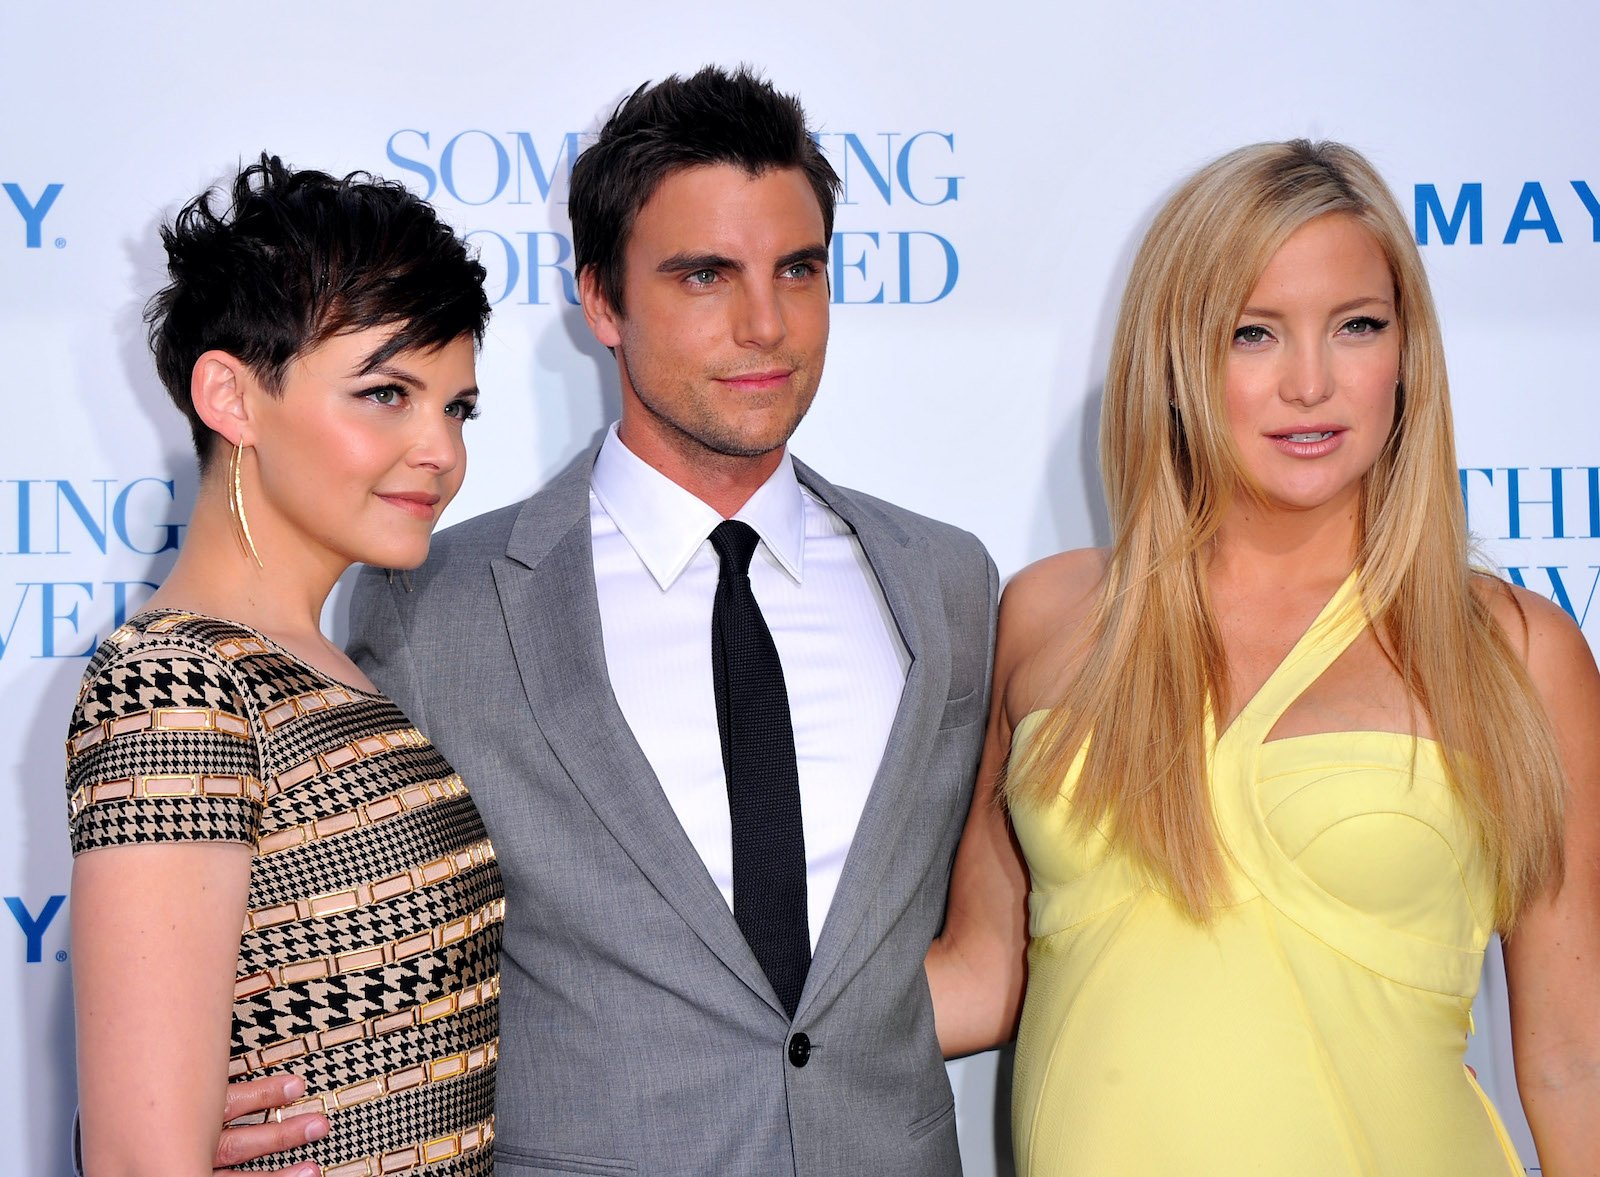 Ginnifer Goodwin, Colin Egglesfield, and Kate Hudson from Something Borrowed walk the red carpet at the film premiere. 